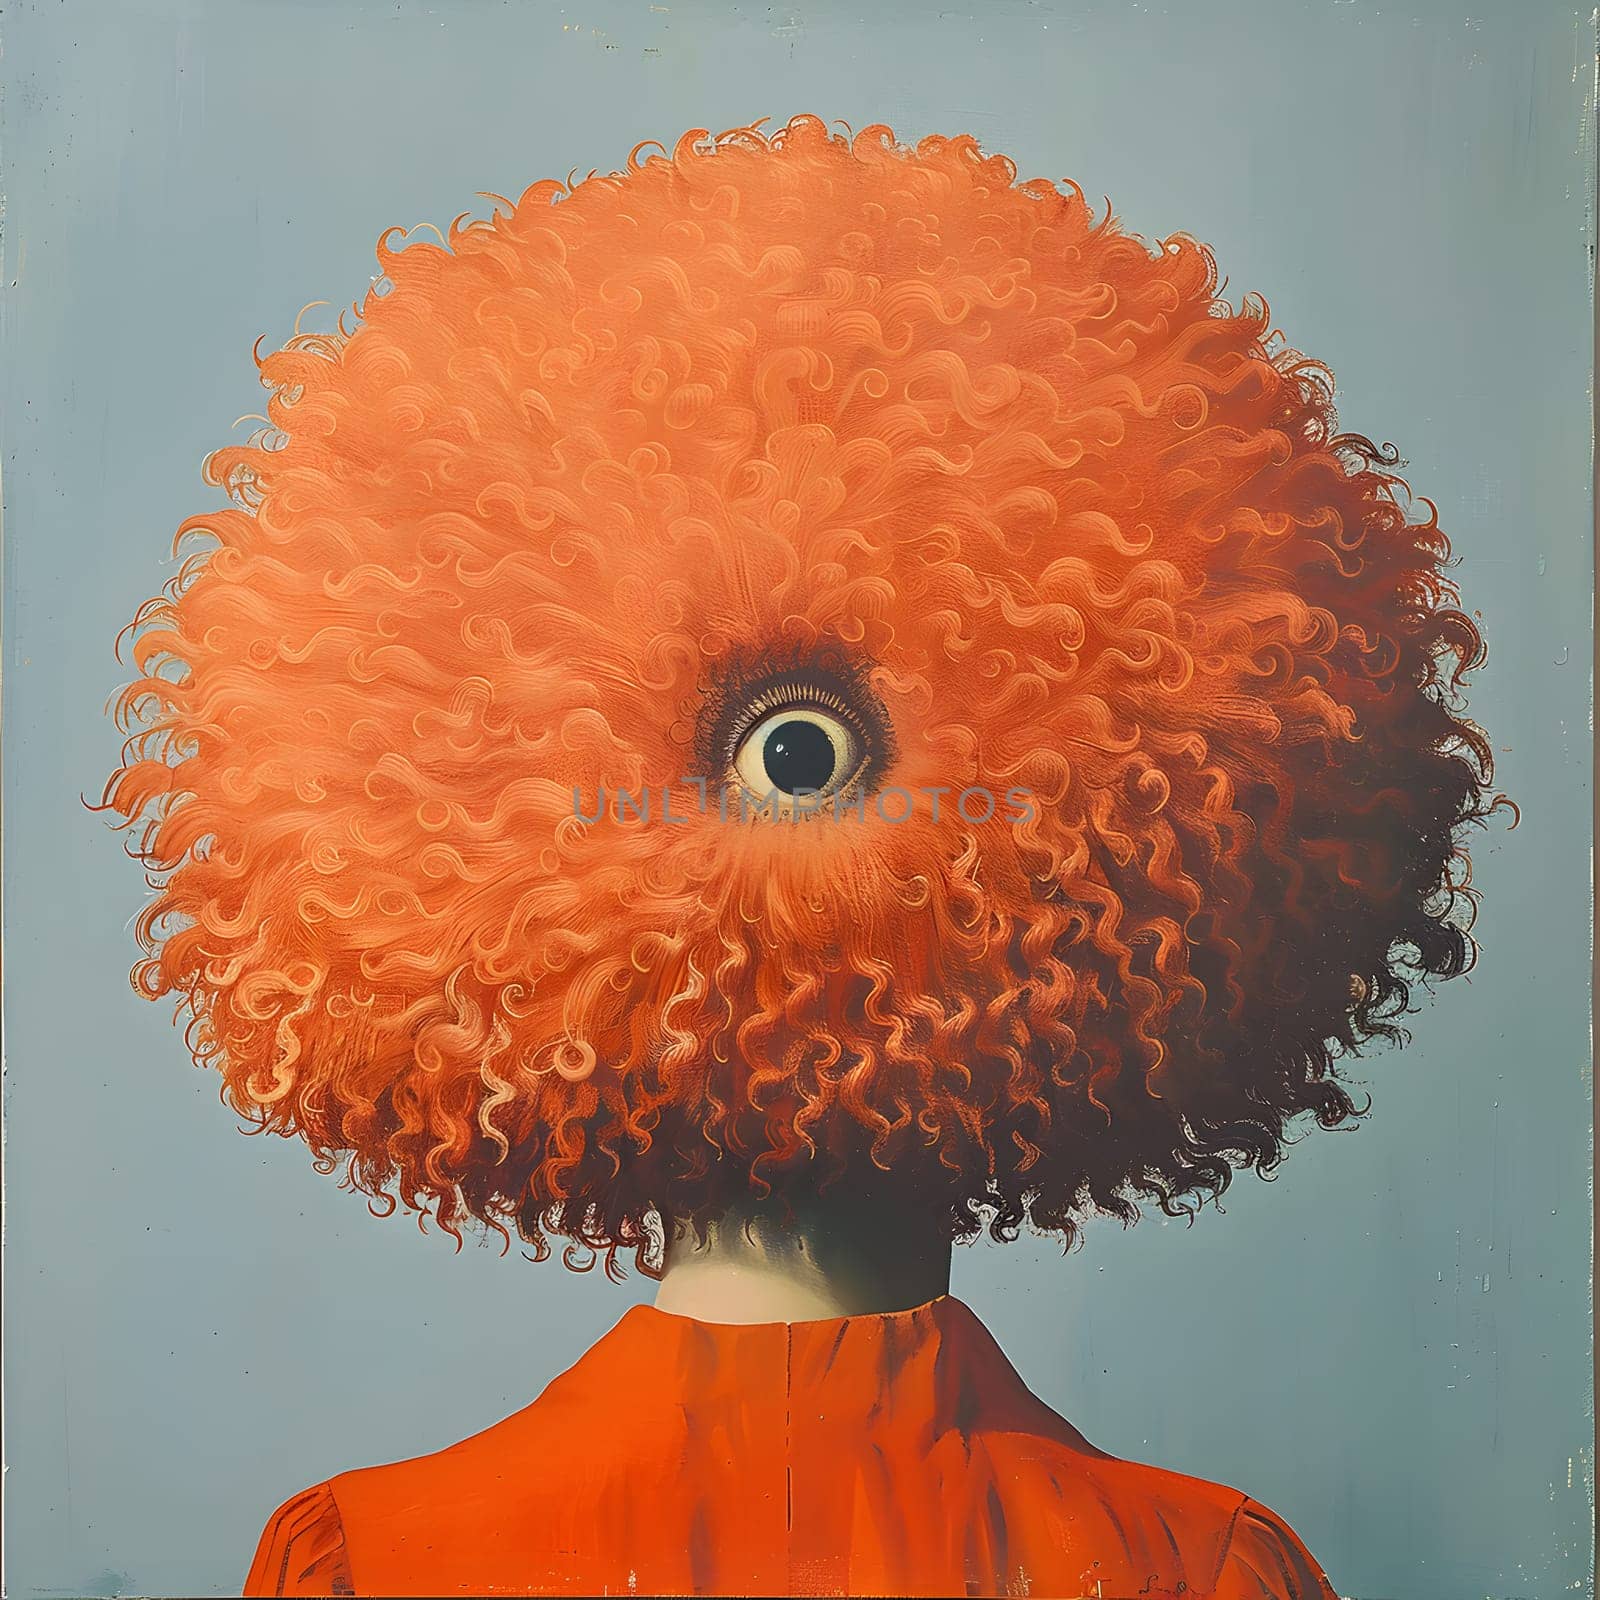 Art piece featuring a person with a massive orange wig by Nadtochiy